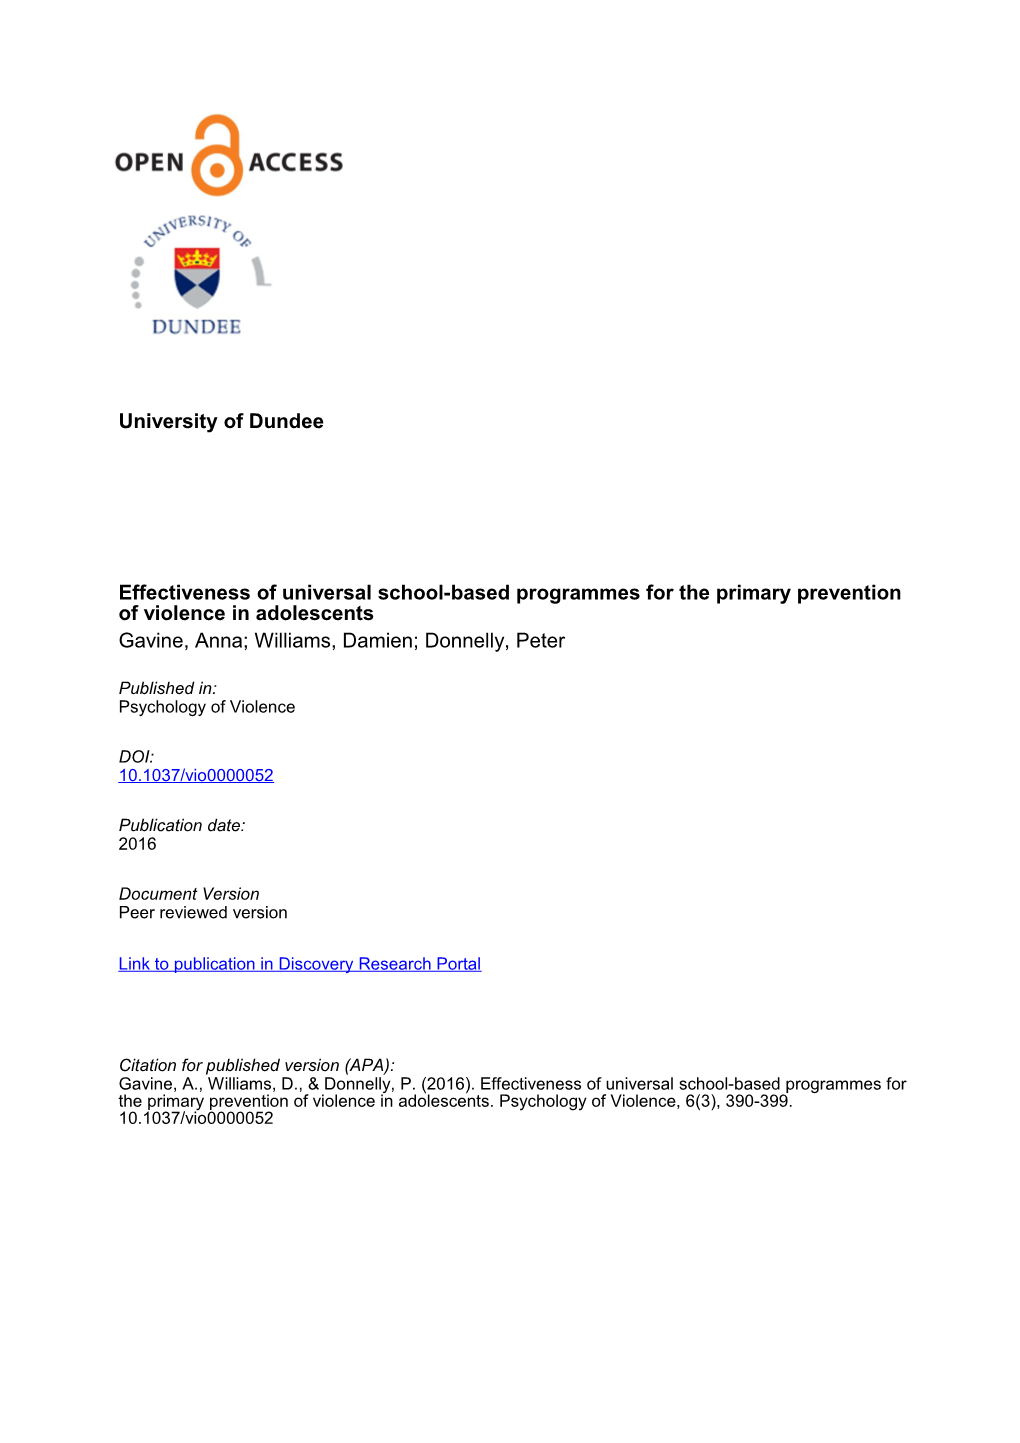 Effectiveness of Universal School-Based Programmes for the Primary Prevention of Violence